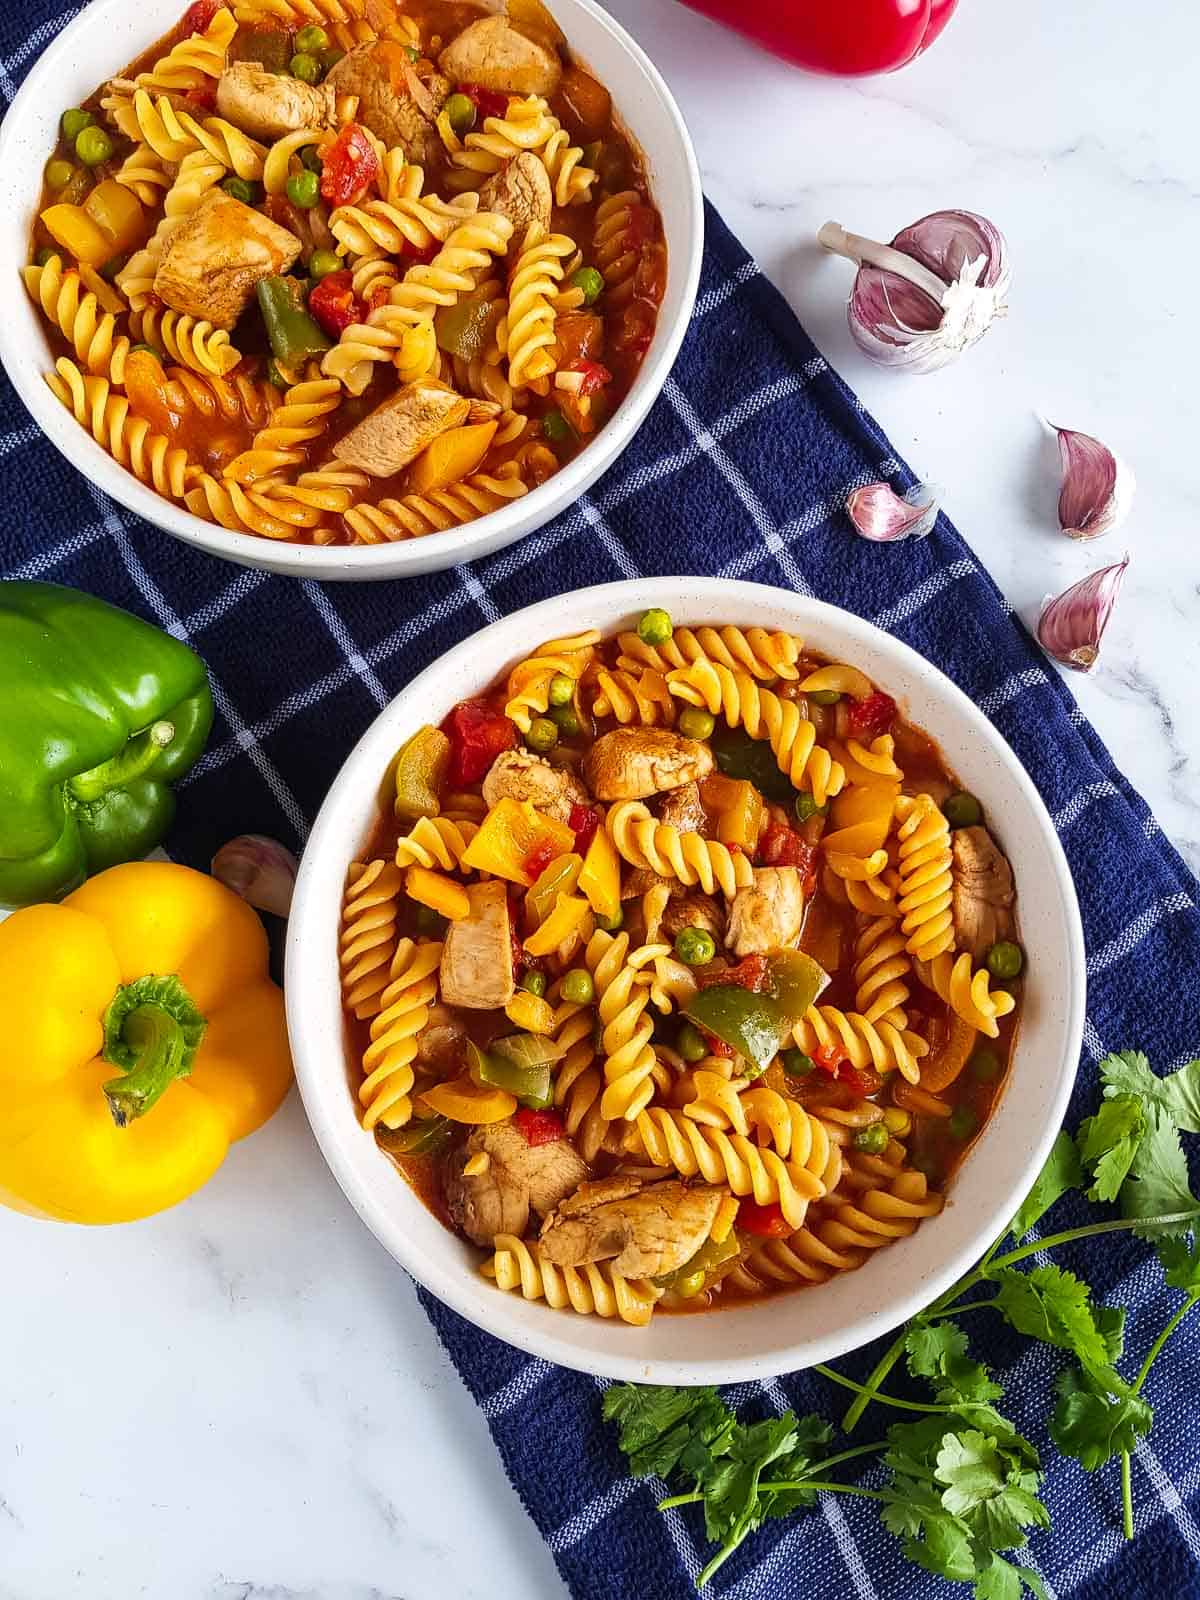 Bowls of curry pasta.